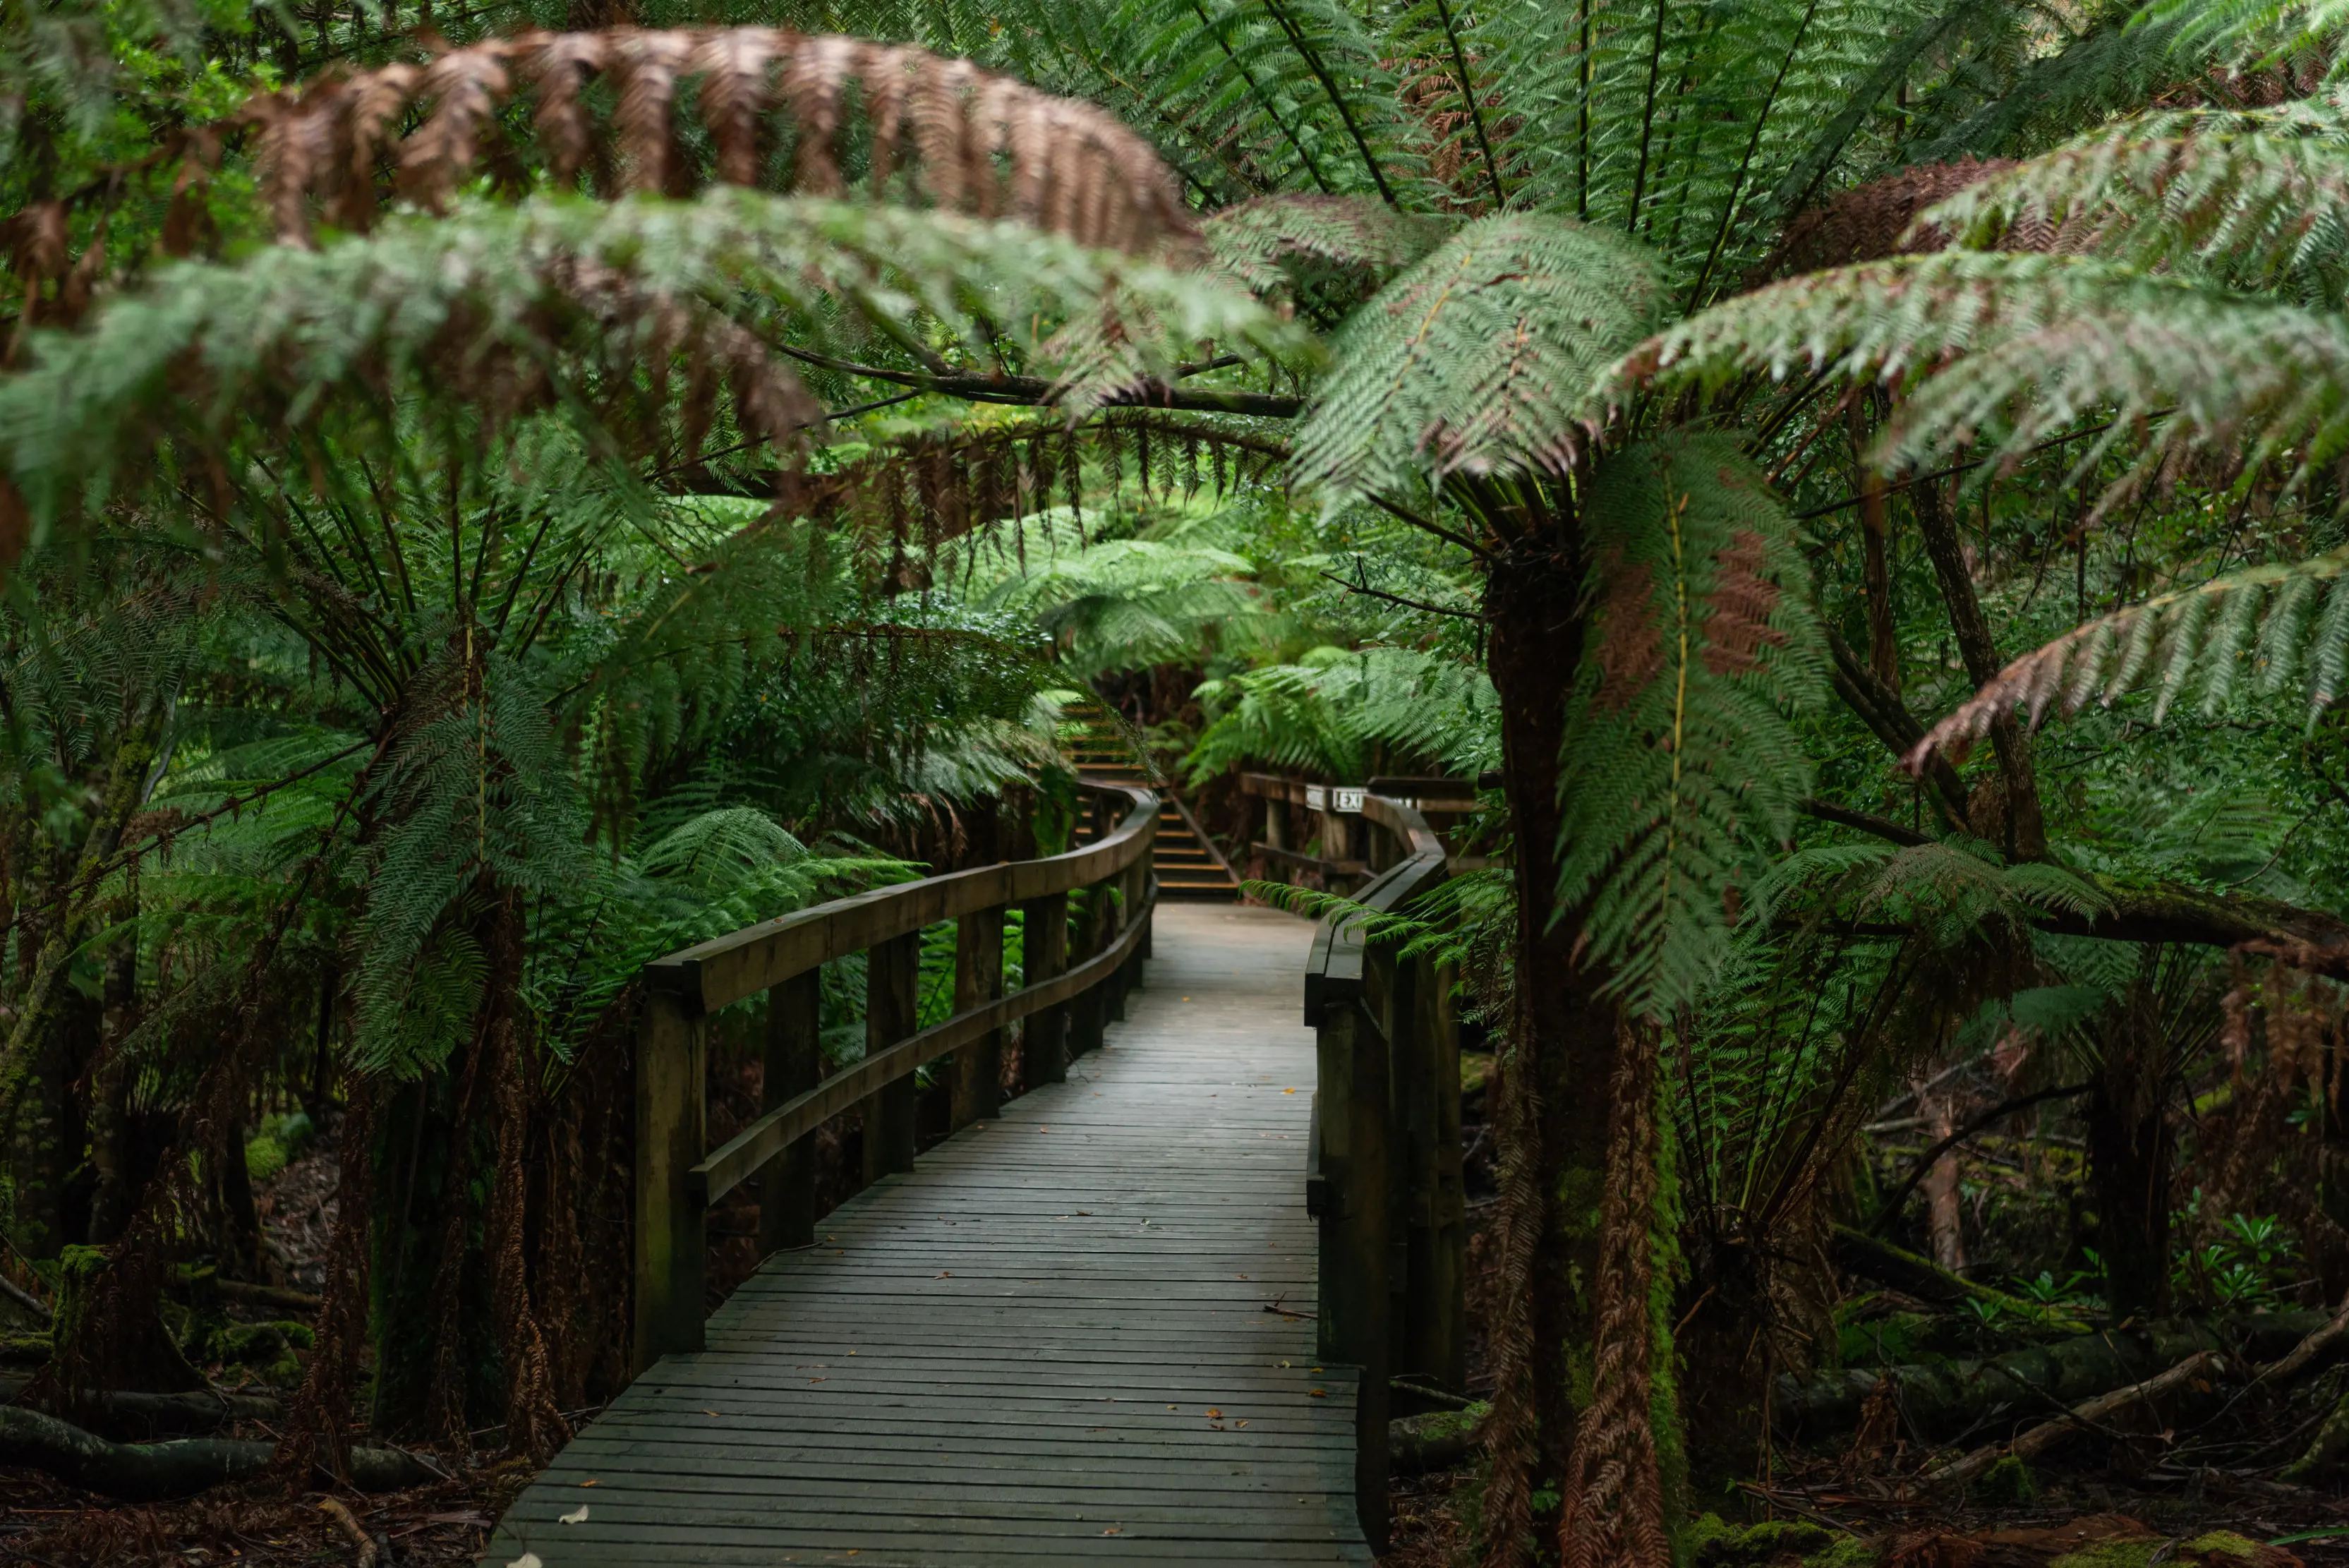 A charming wooden boardwalk is surrounded by lush, dense, green ferns on either side on the walk to Hastings Caves and Thermal Springs.